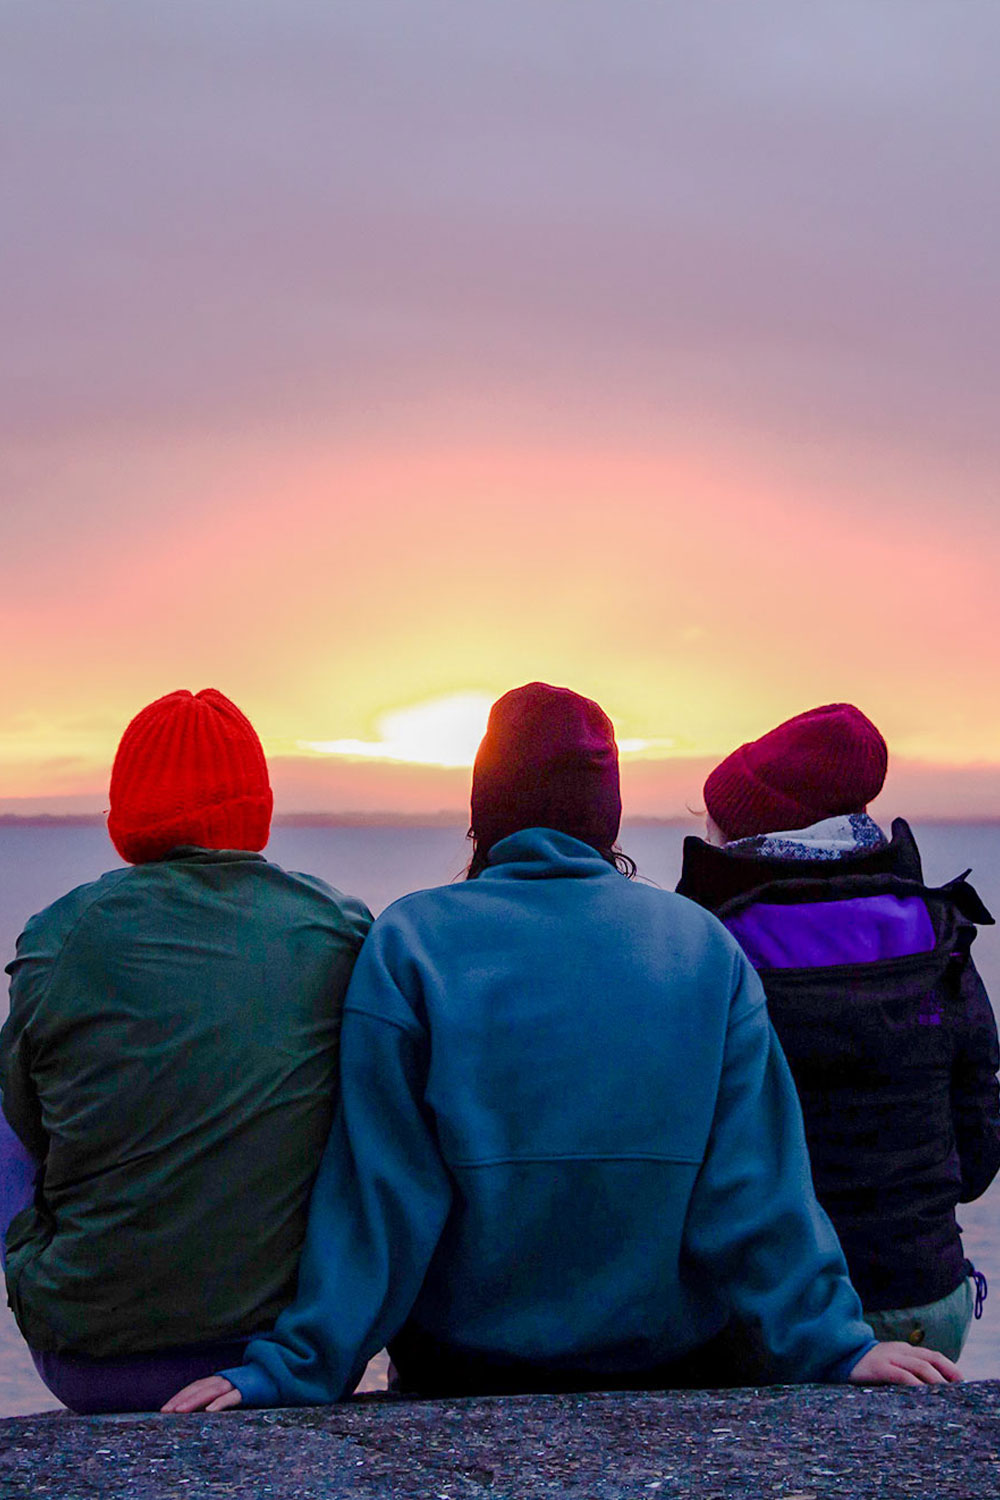 Three friends sitting watching the sunset on the Galway coast, Ireland.